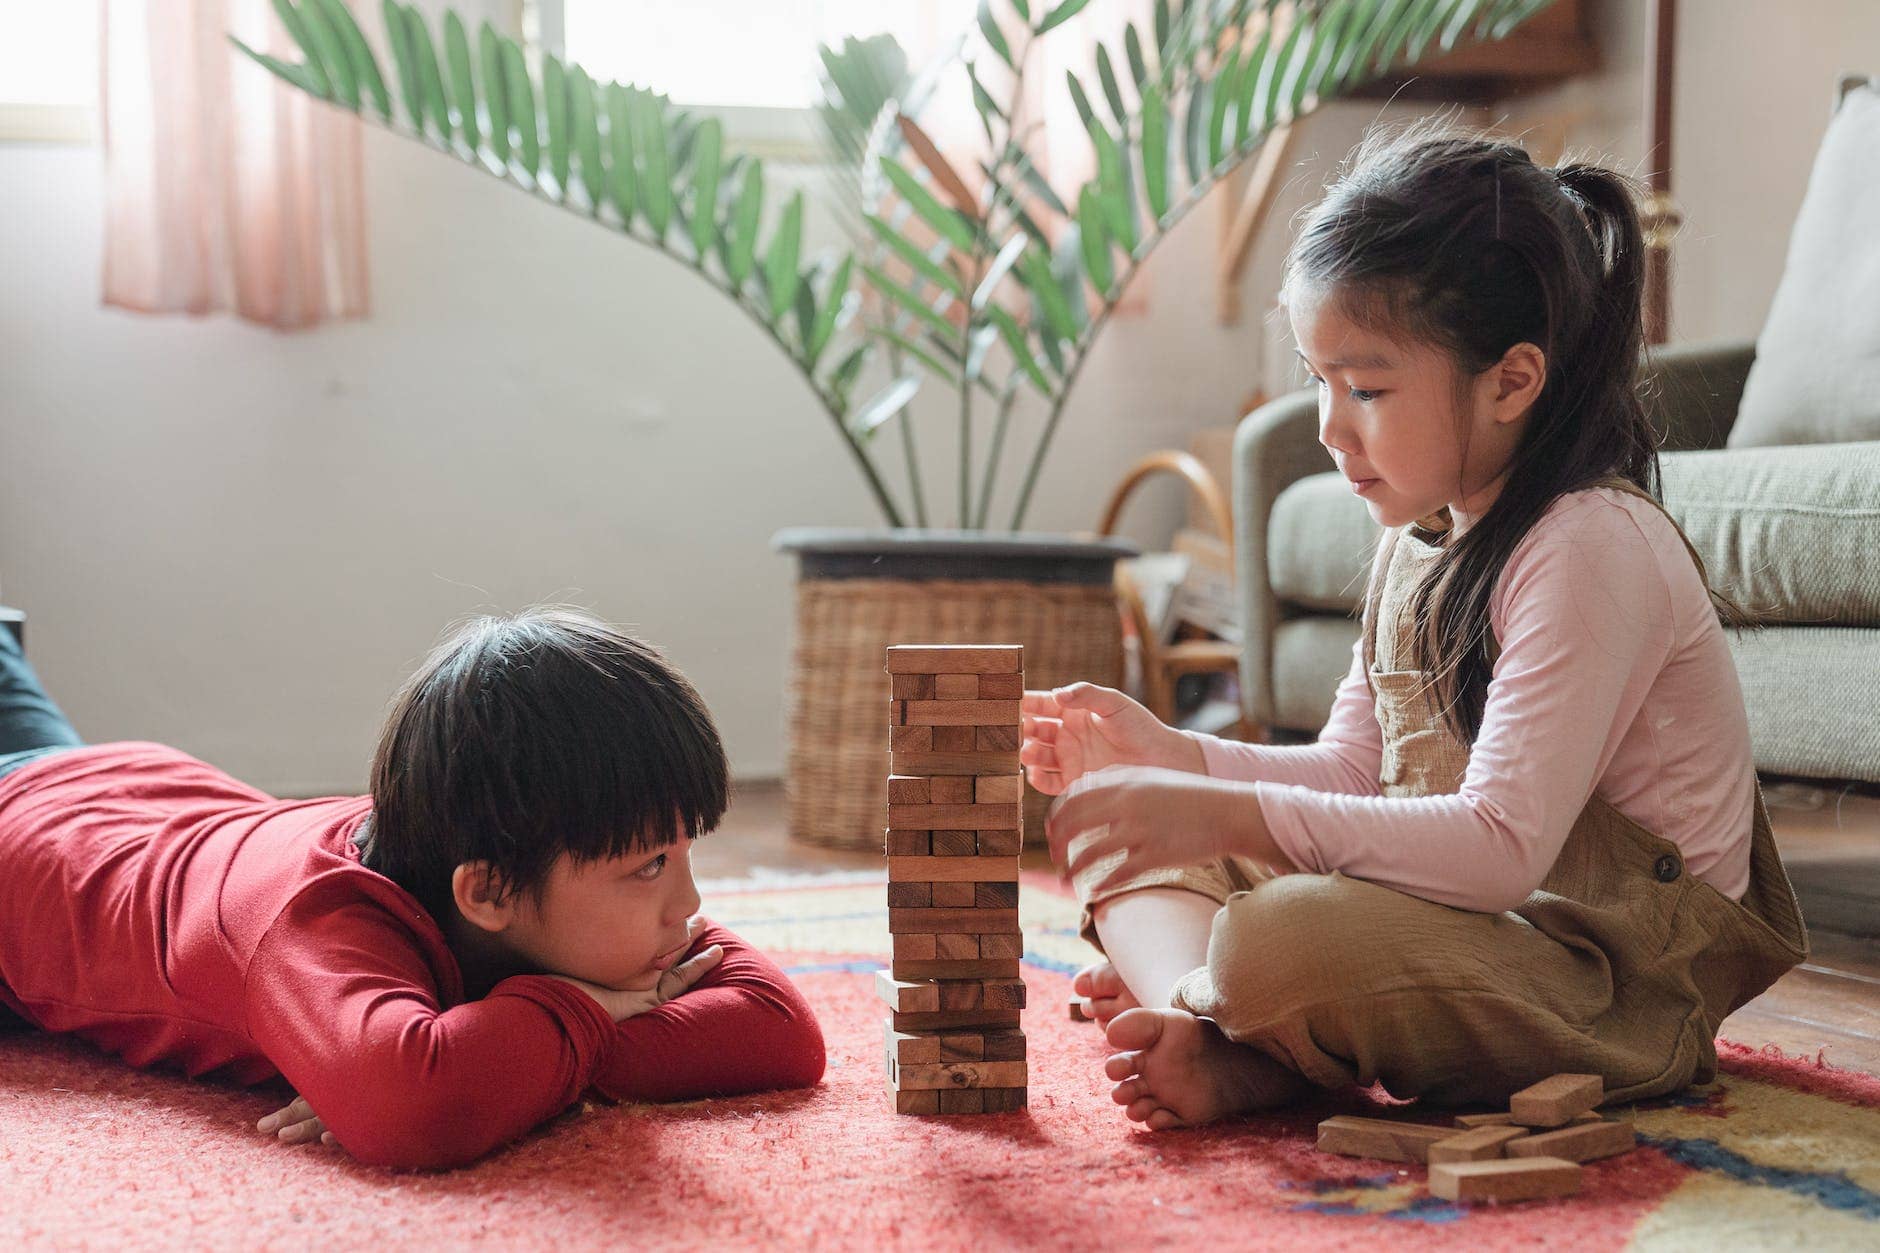 content asian children building wooden tower on floor at home